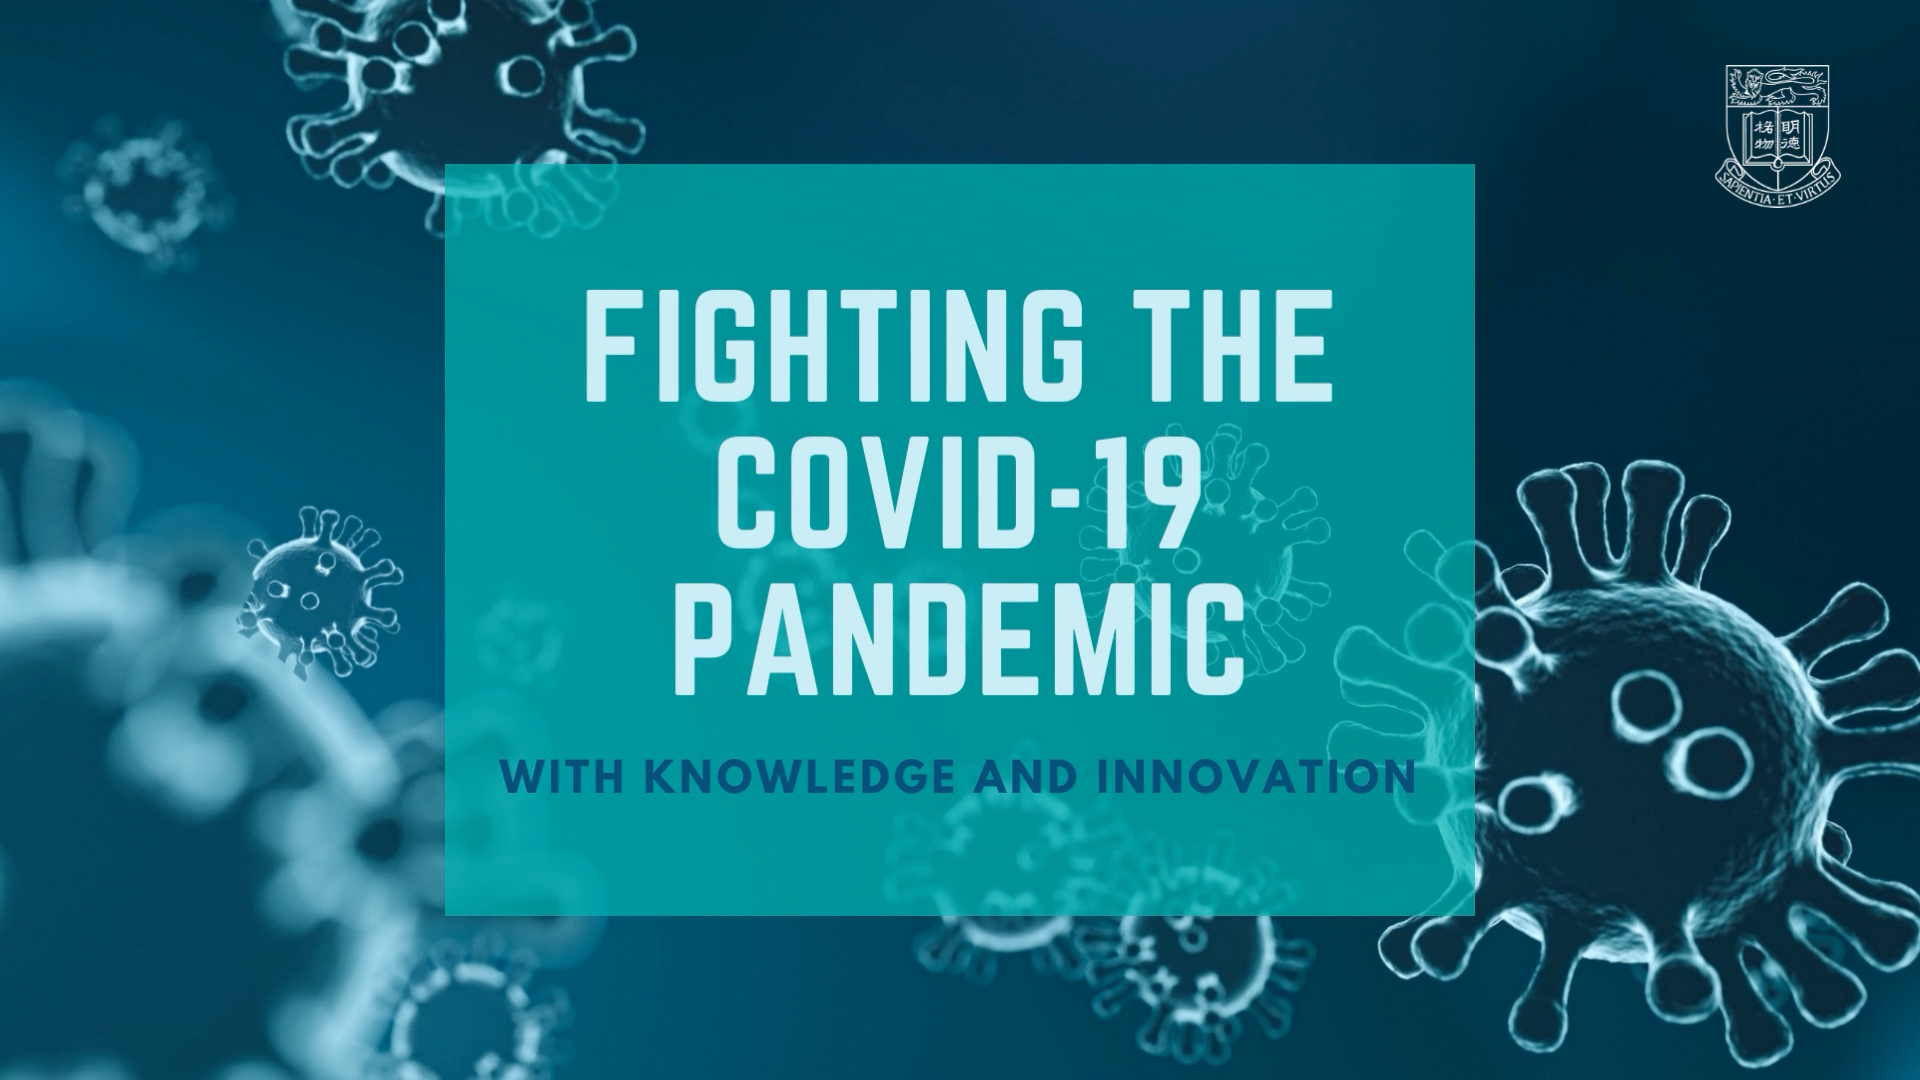 FIGHTING AGAINST THE PANDEMIC